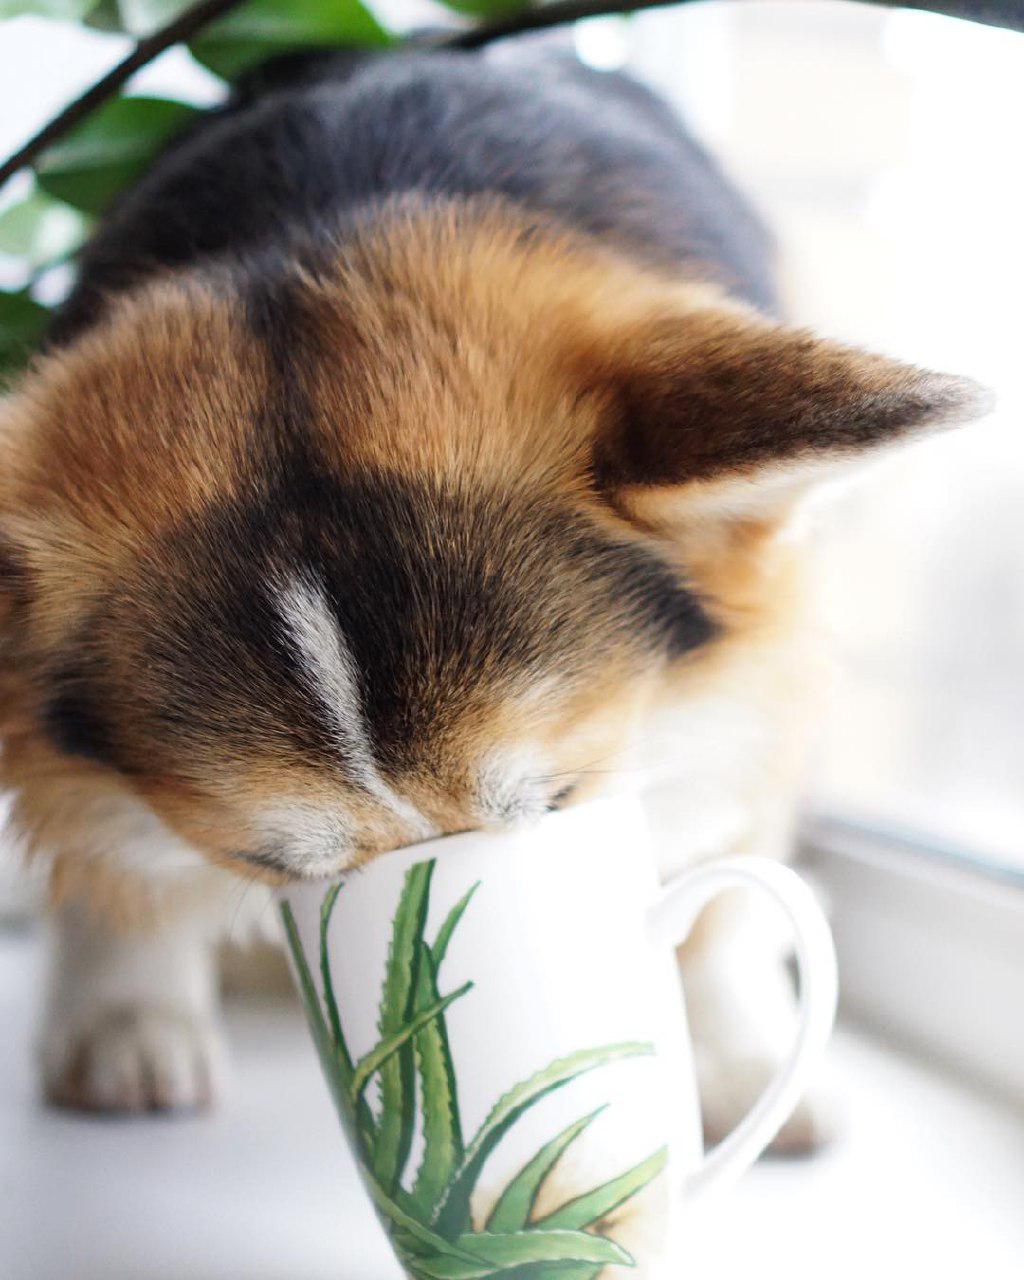 A Corgi with its face on the cup while standing by the window